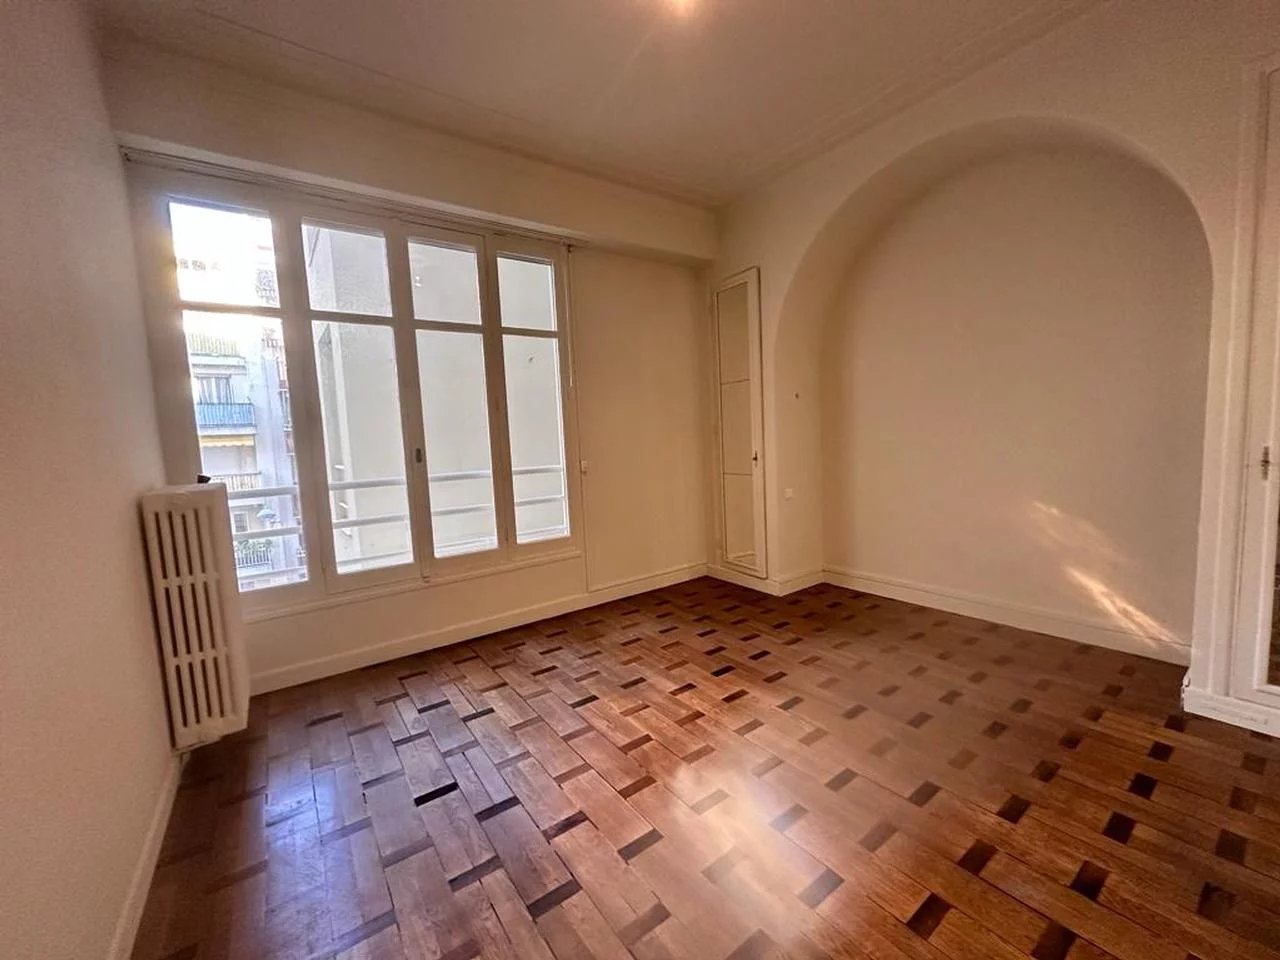 Appartement  3 Rooms 118.06m2  for sale  1 395 000 €